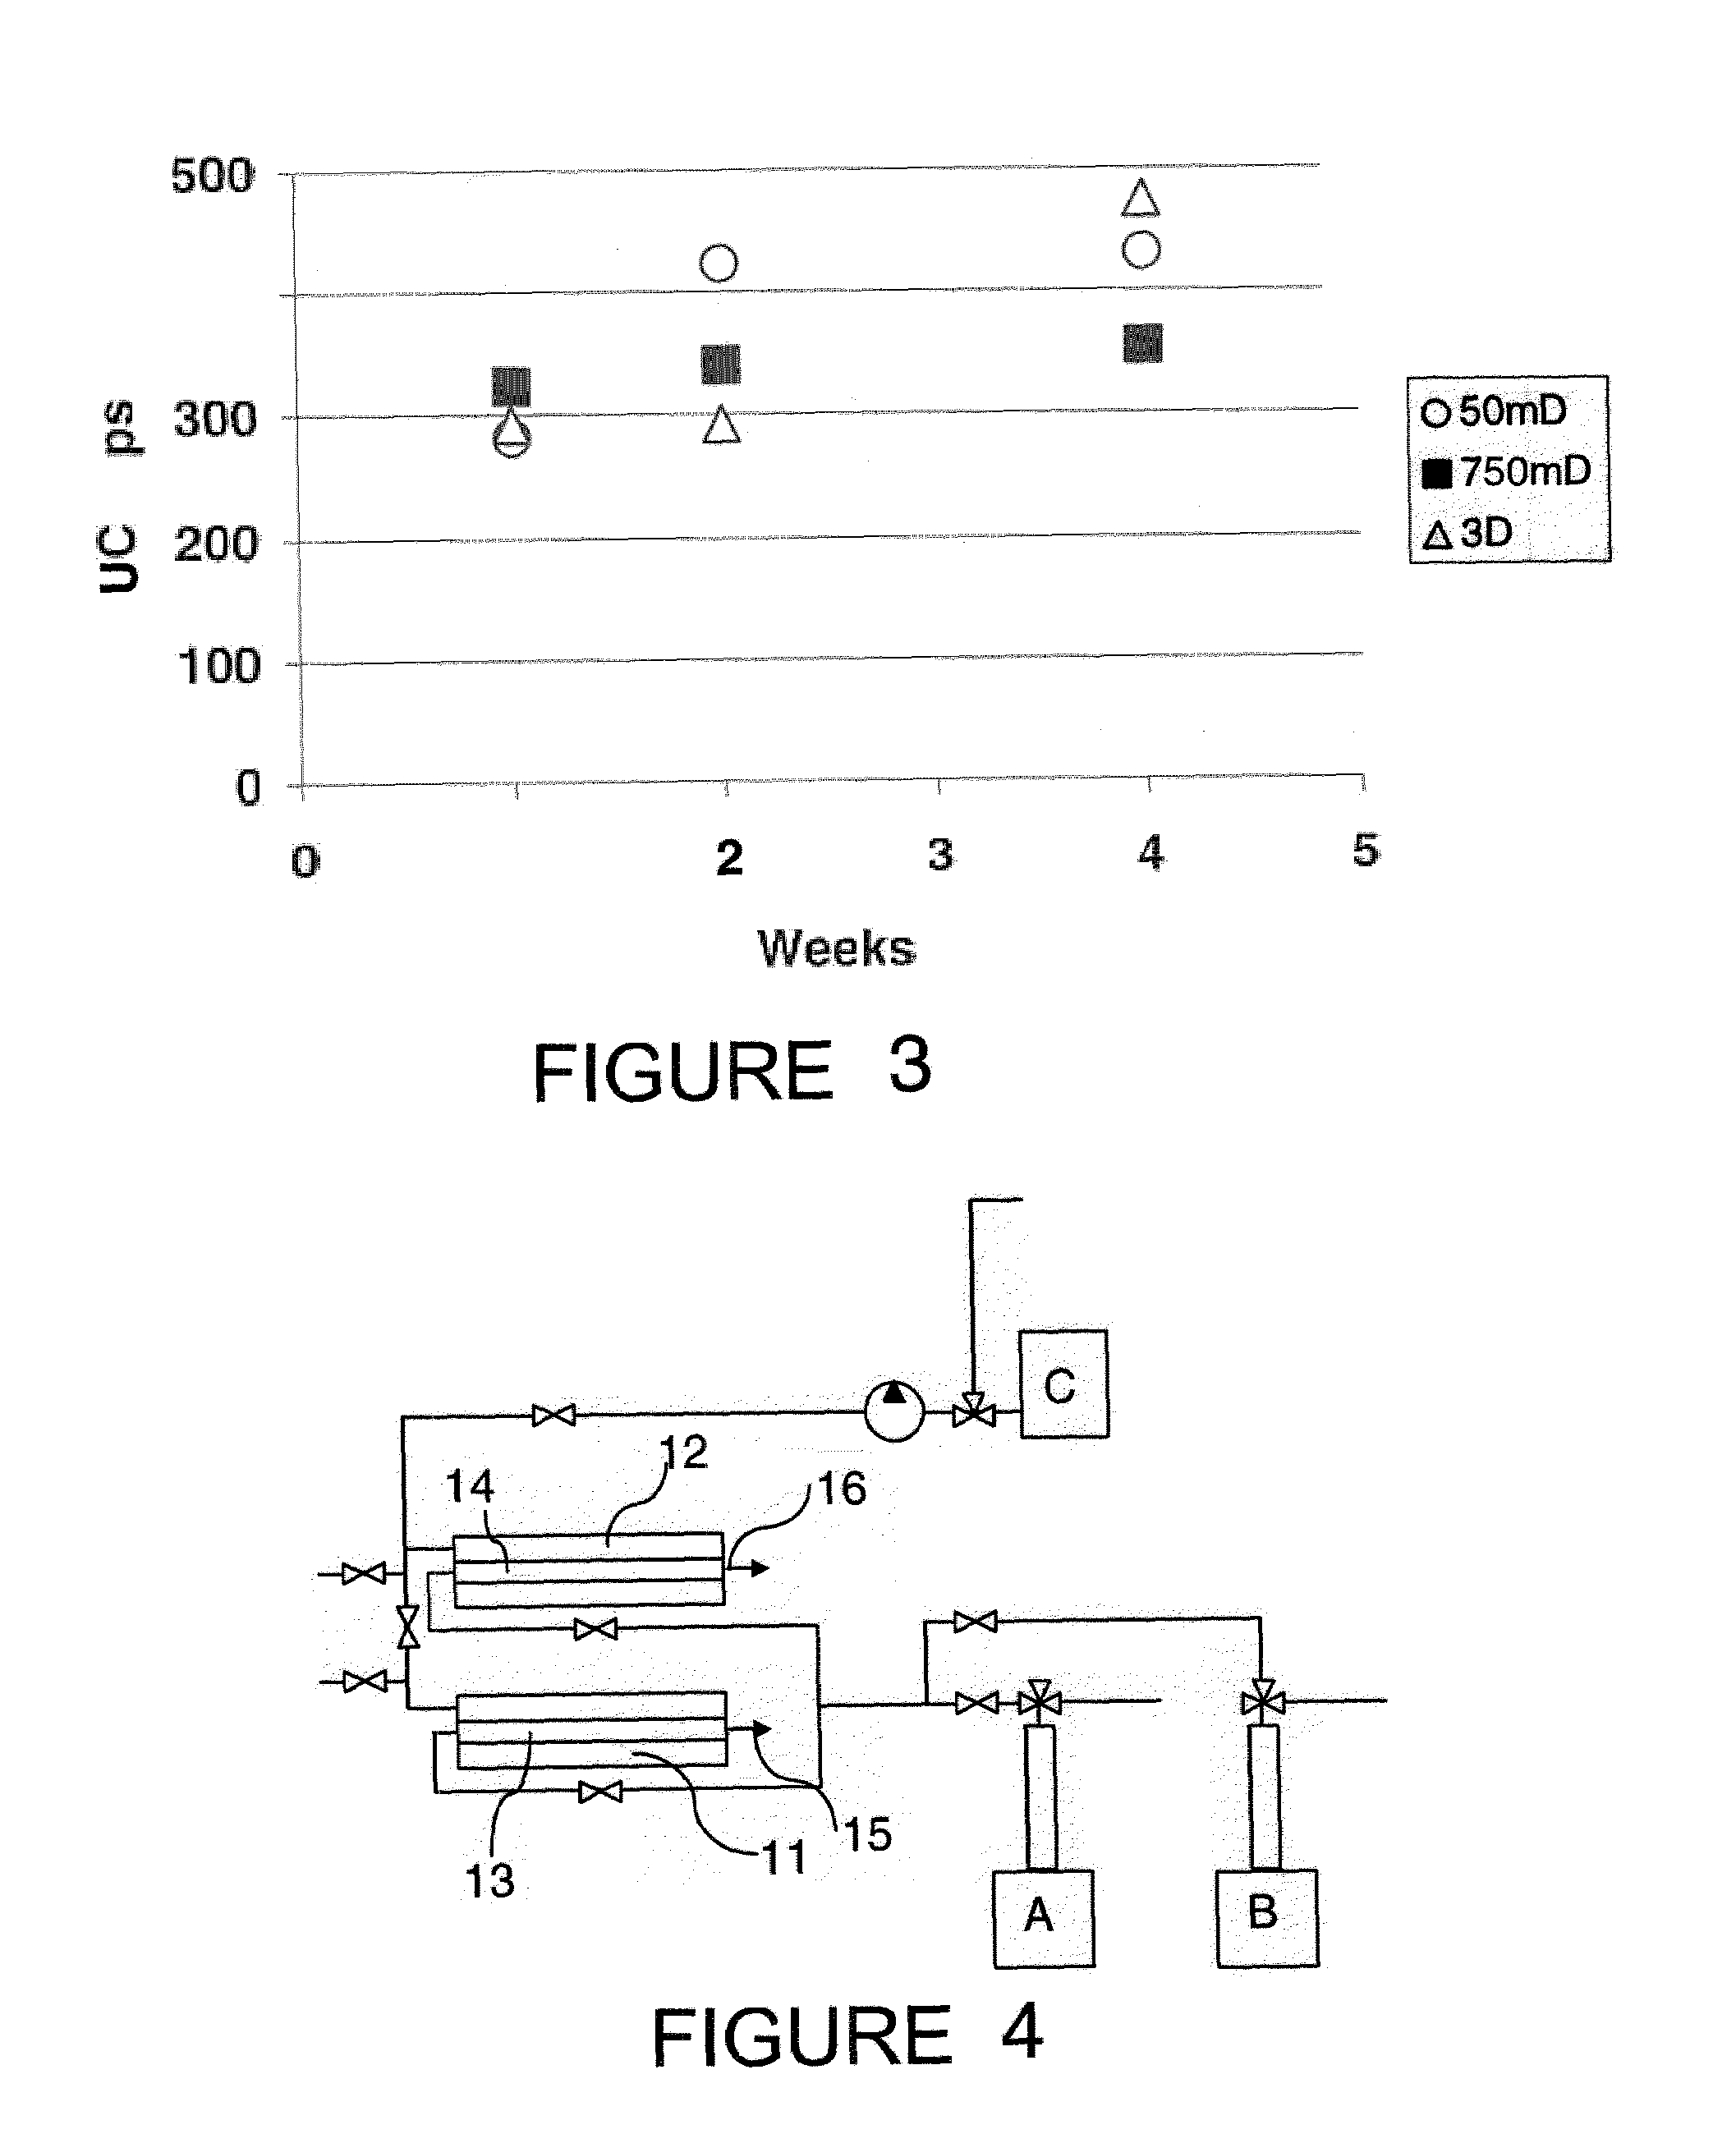 Method of completing poorly consolidated formations